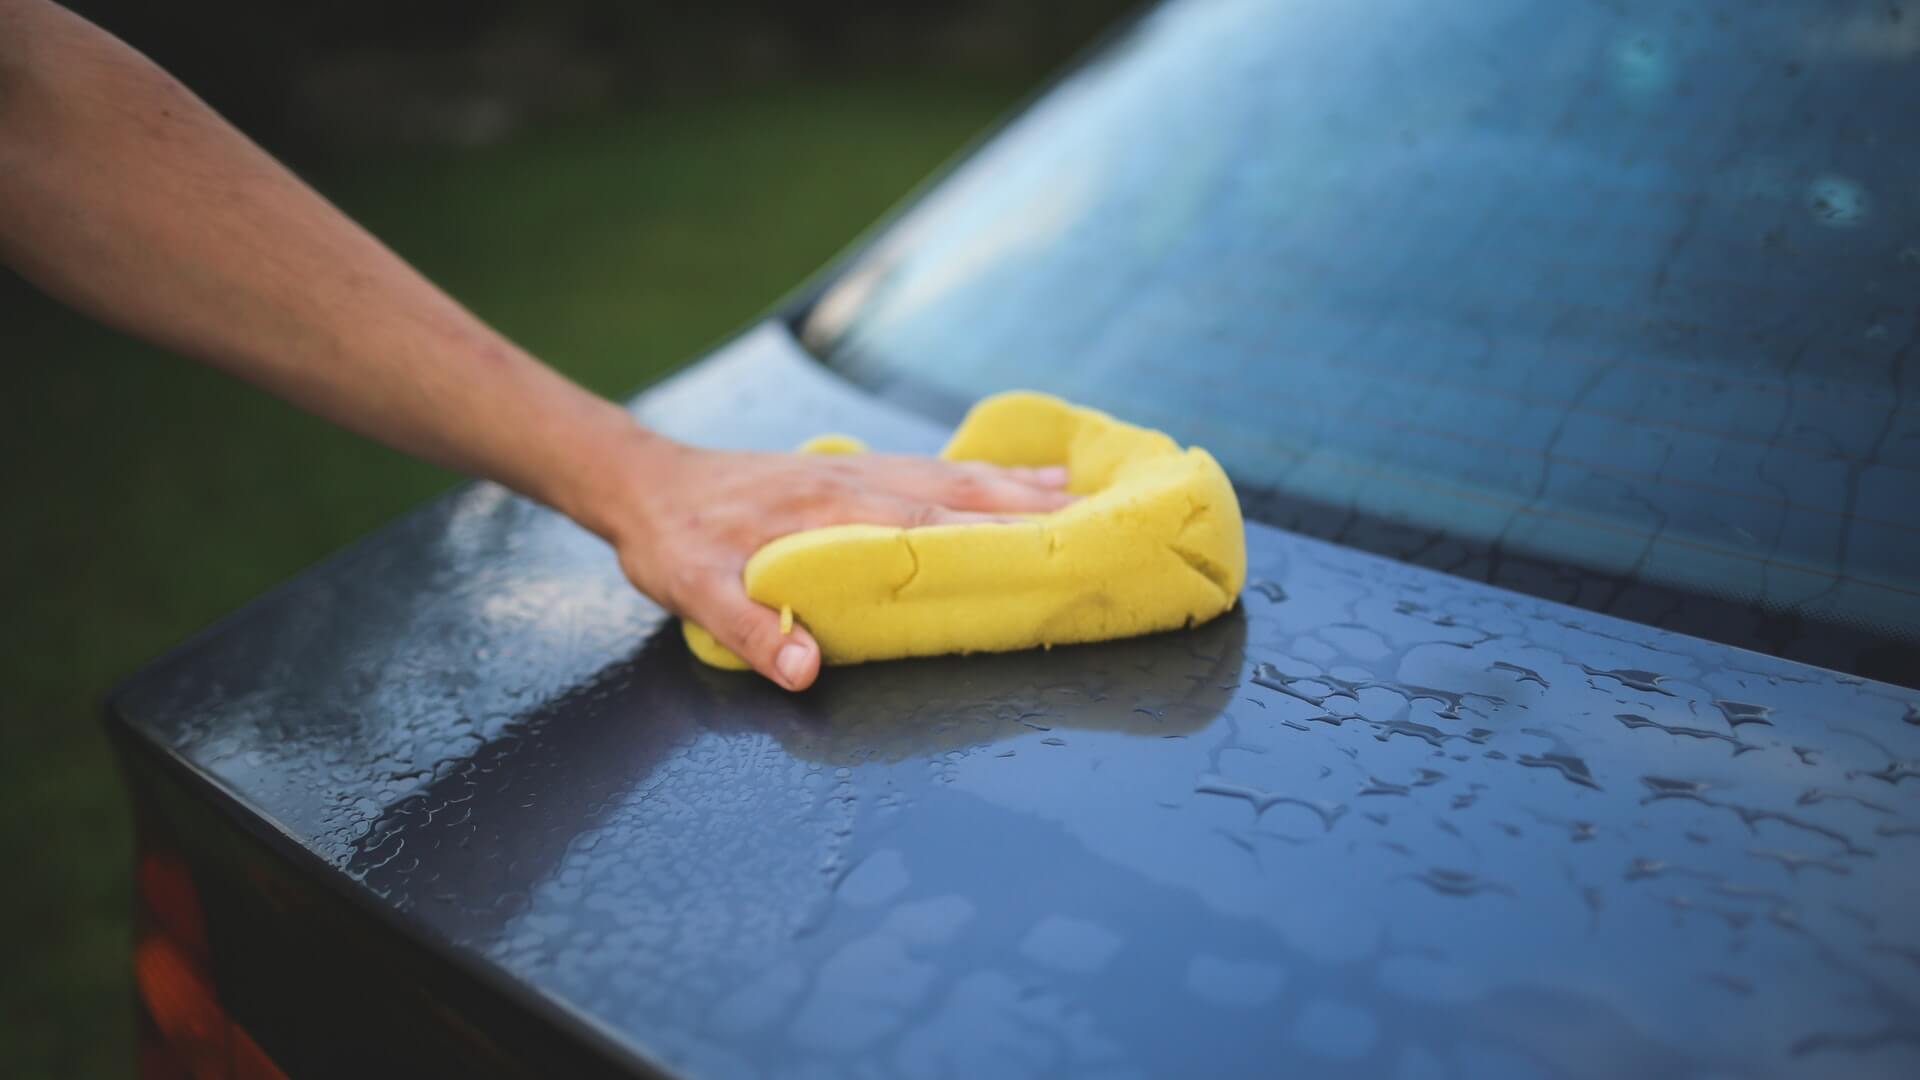 Calls for government to start trialling car wash licensing schemes